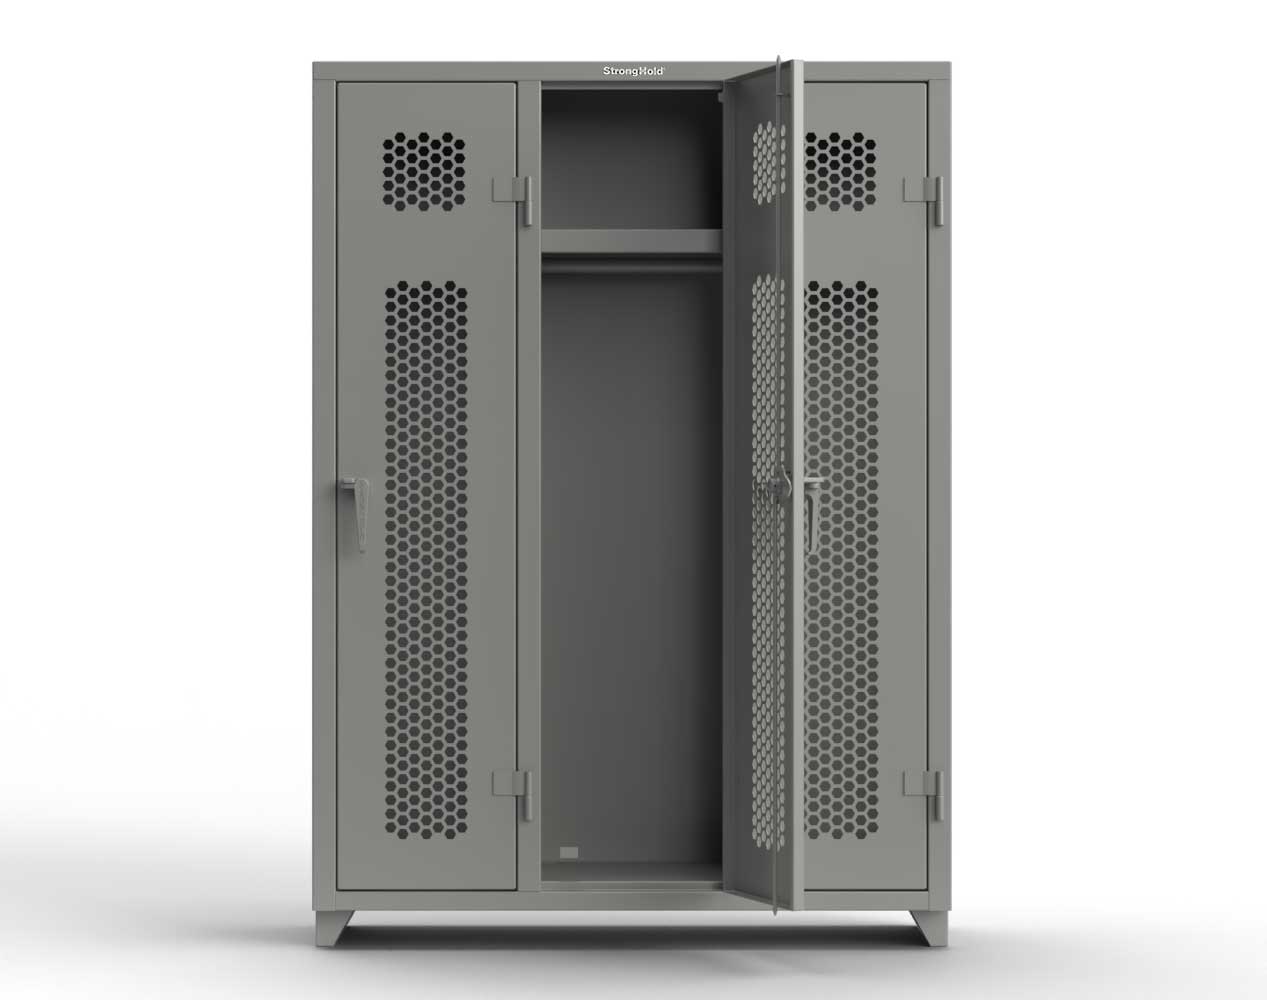 Extra Heavy Duty 14 GA Ventilated Single-Tier Locker with Shelf and Hanger Rod, 3 Compartments - 54 in. W x 18 in. D x 75 in. H